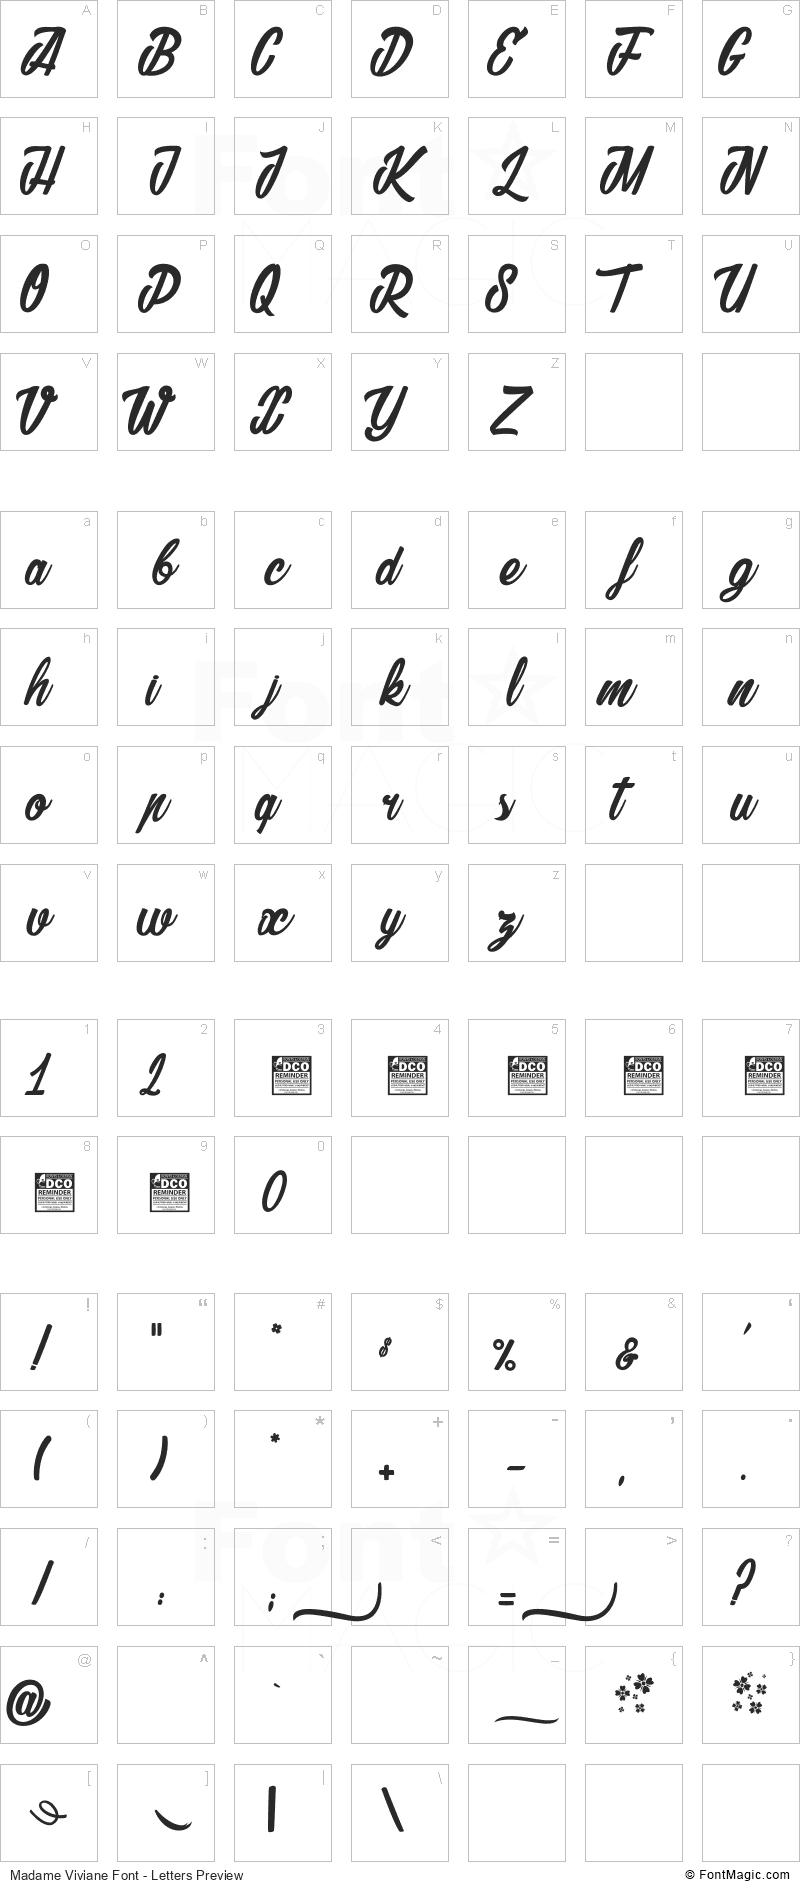 Madame Viviane Font - All Latters Preview Chart